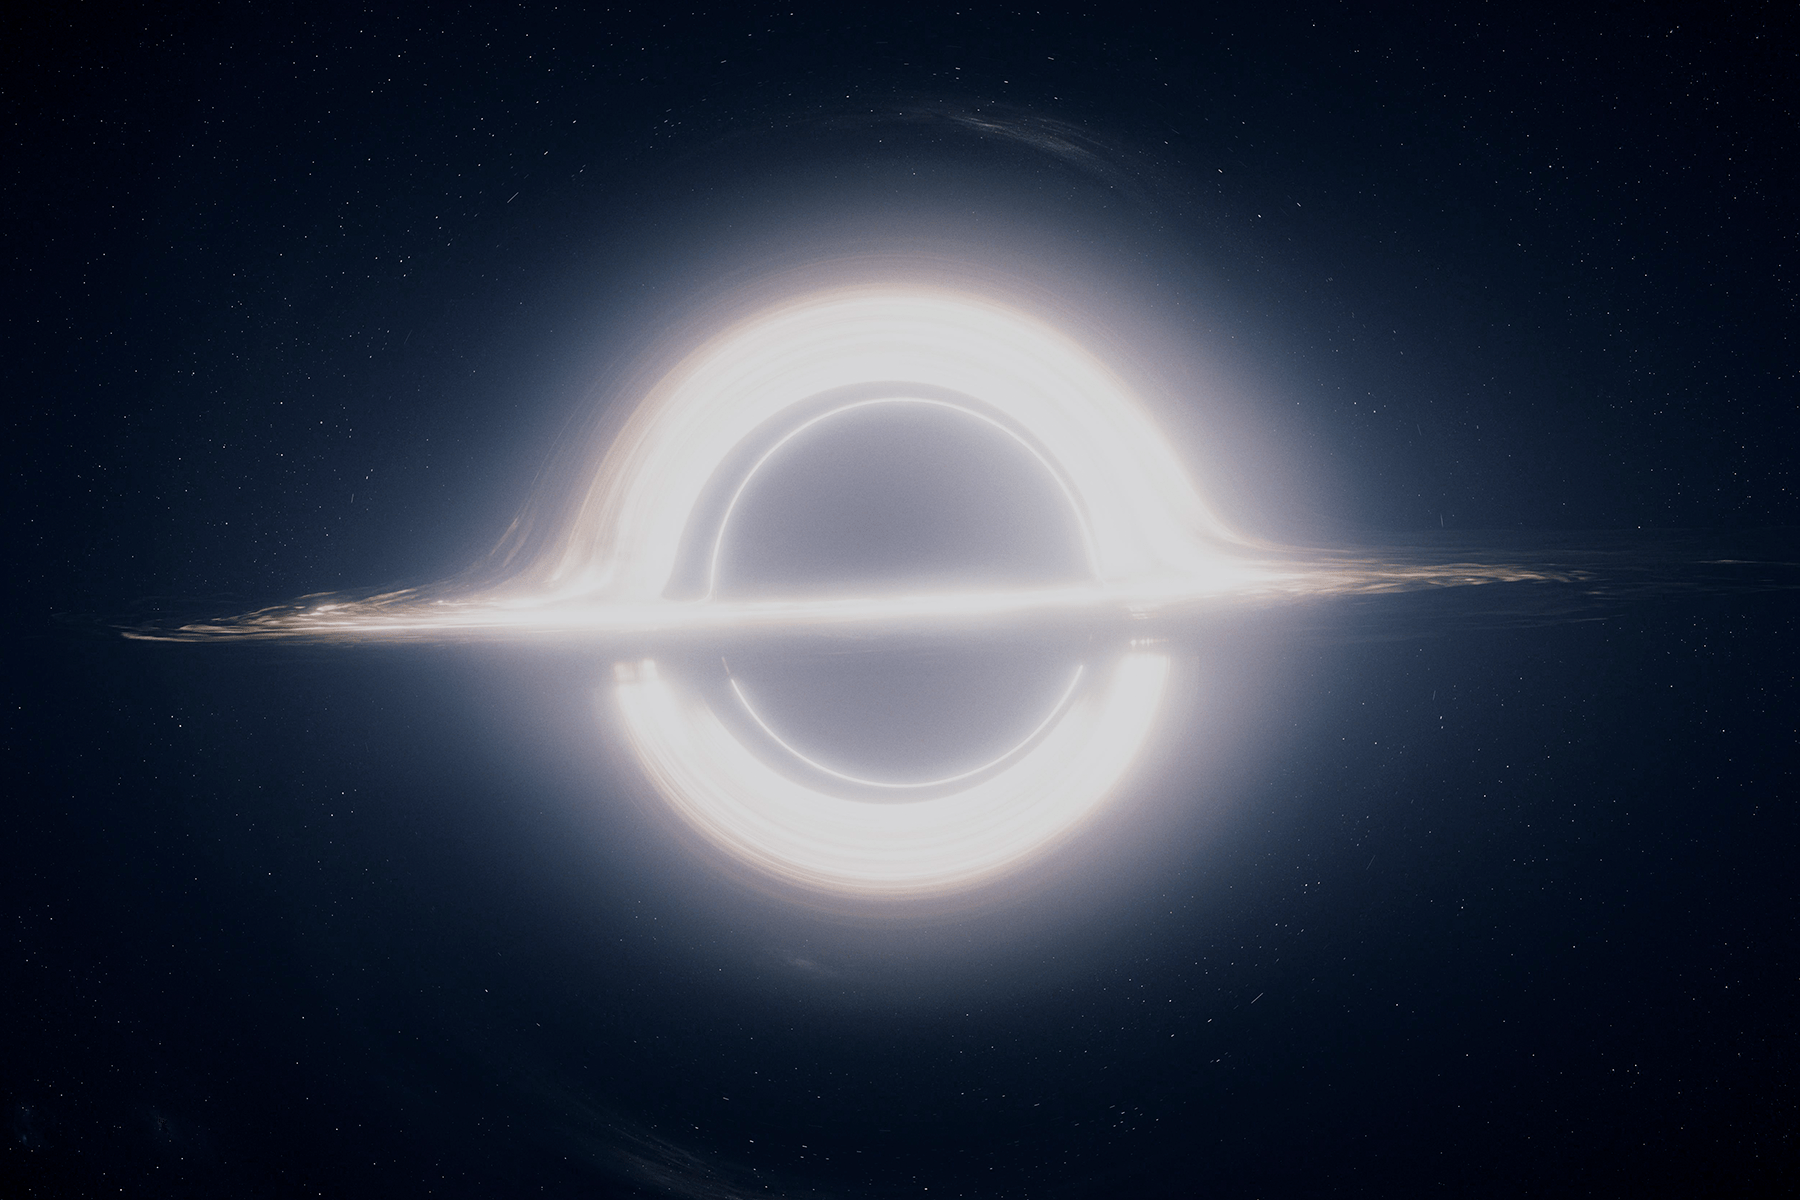 The Physics Behind "Interstellar's" Visual Effects Was So it Led a Scientific Discovery - Universe